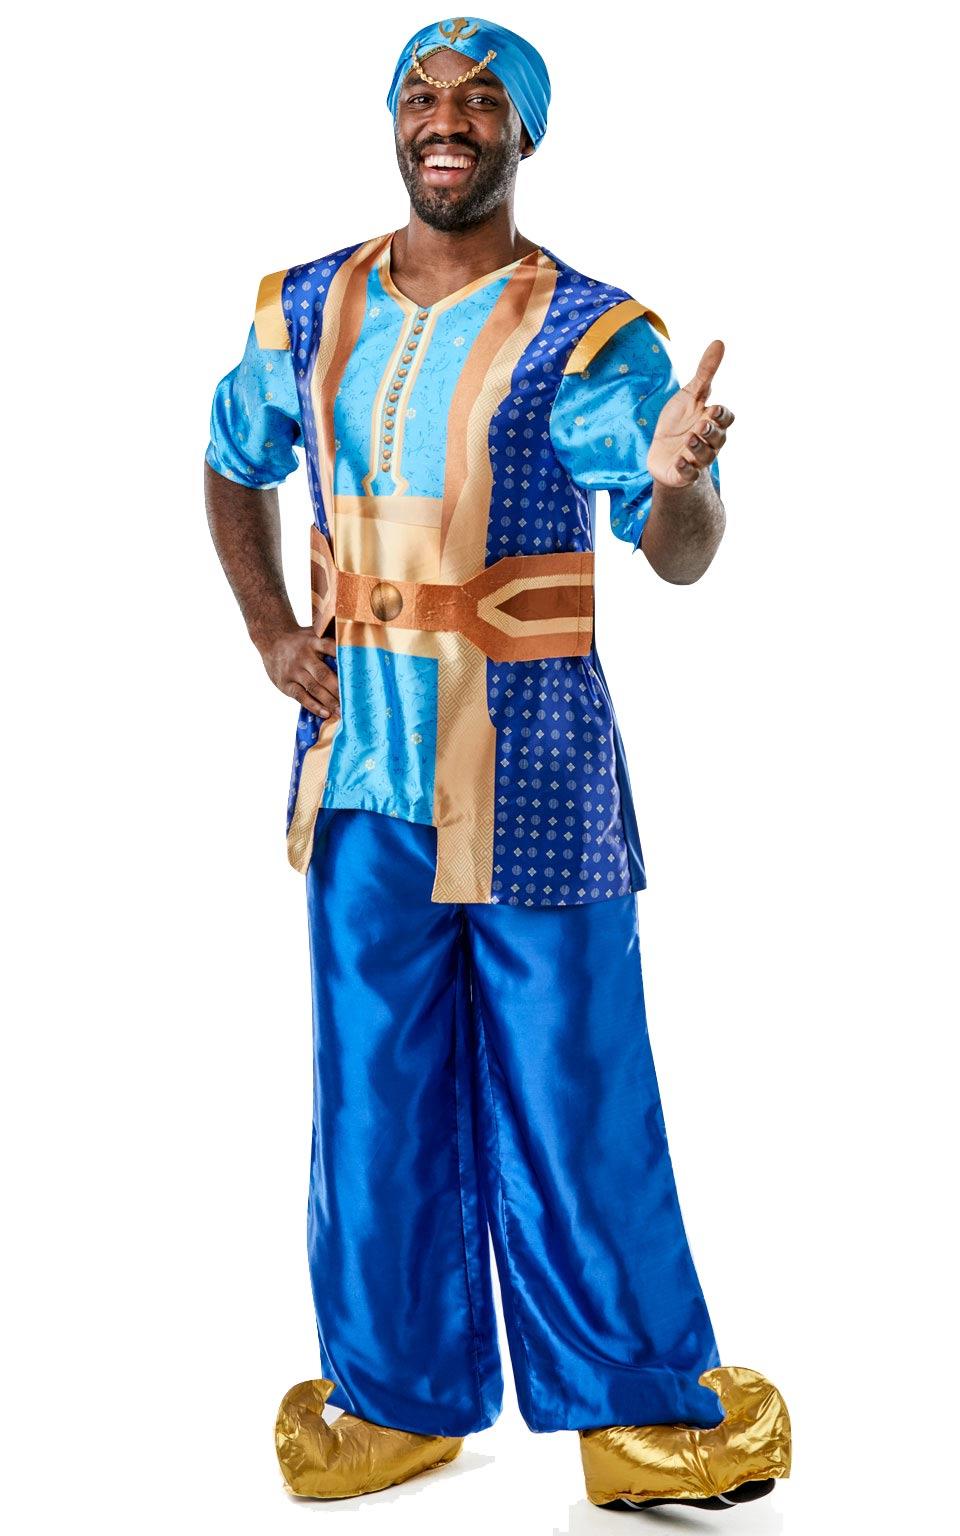 Disney's Adult Genie Fancy Dress Costume by Rubies 300316 available here at Karnival Costumes online party shop